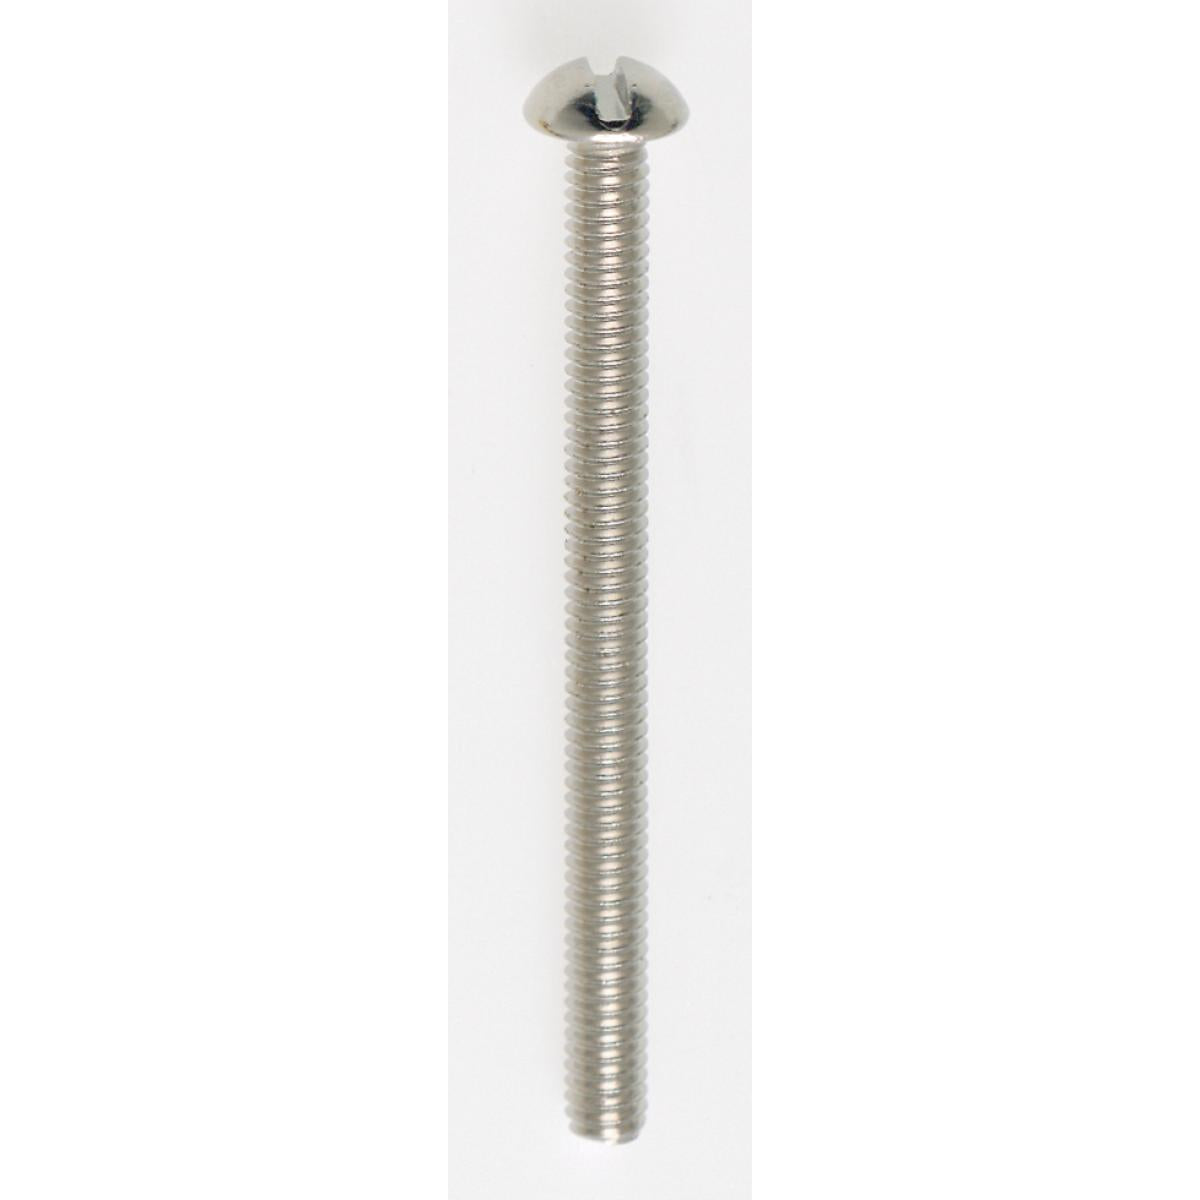 Satco 90-029 Steel Round Head Slotted Machine Screw 8/32 2" Length Nickel Plated Finish